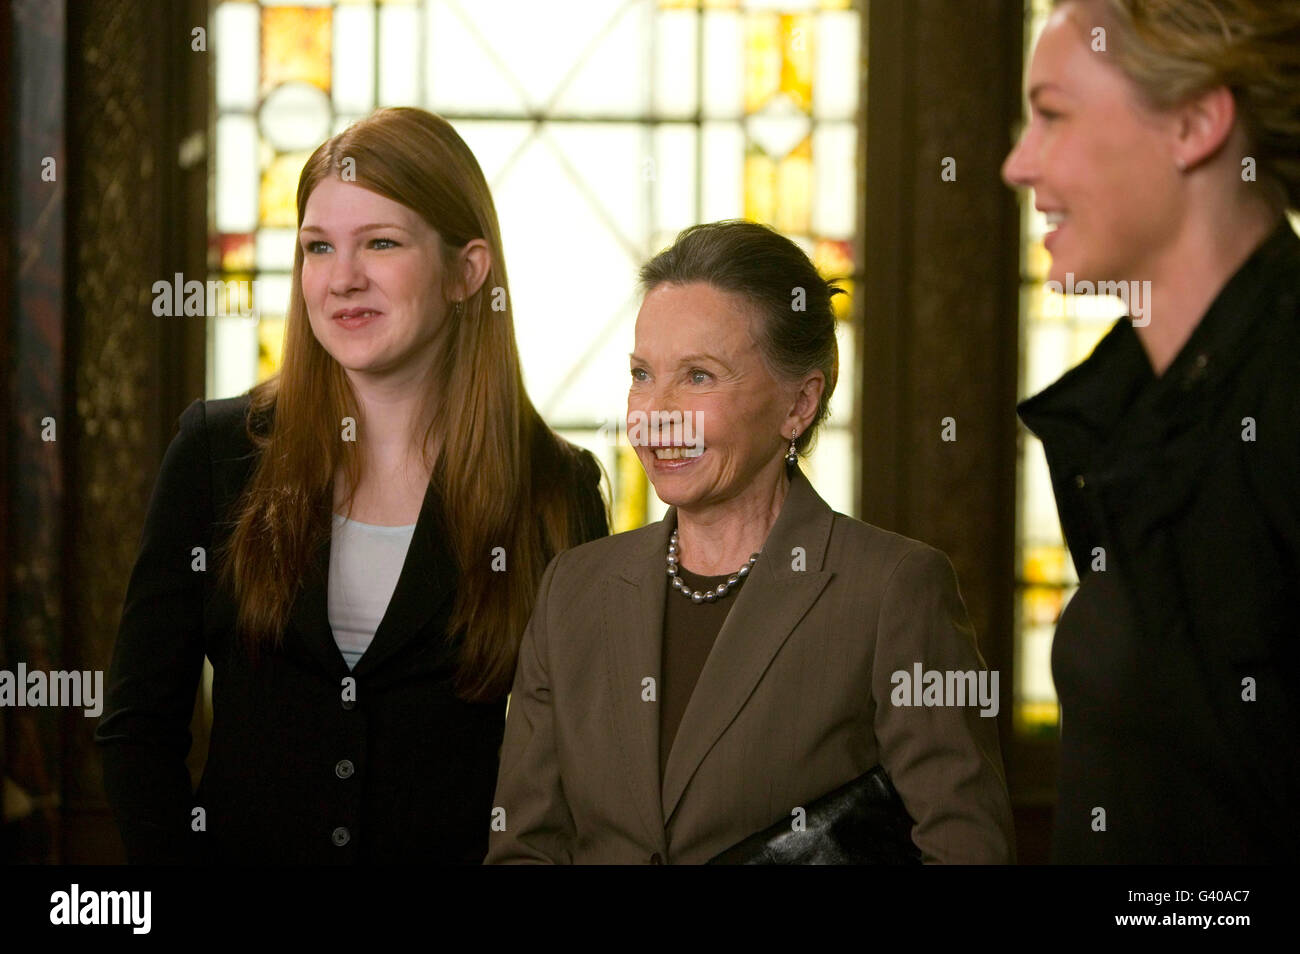 8 May 2006 - North Bergen, NJ - Actresses (LtoR) Lily Rabe, Leslie Caron and Connie Nielsen on set of Law & Order SVU Stock Photo